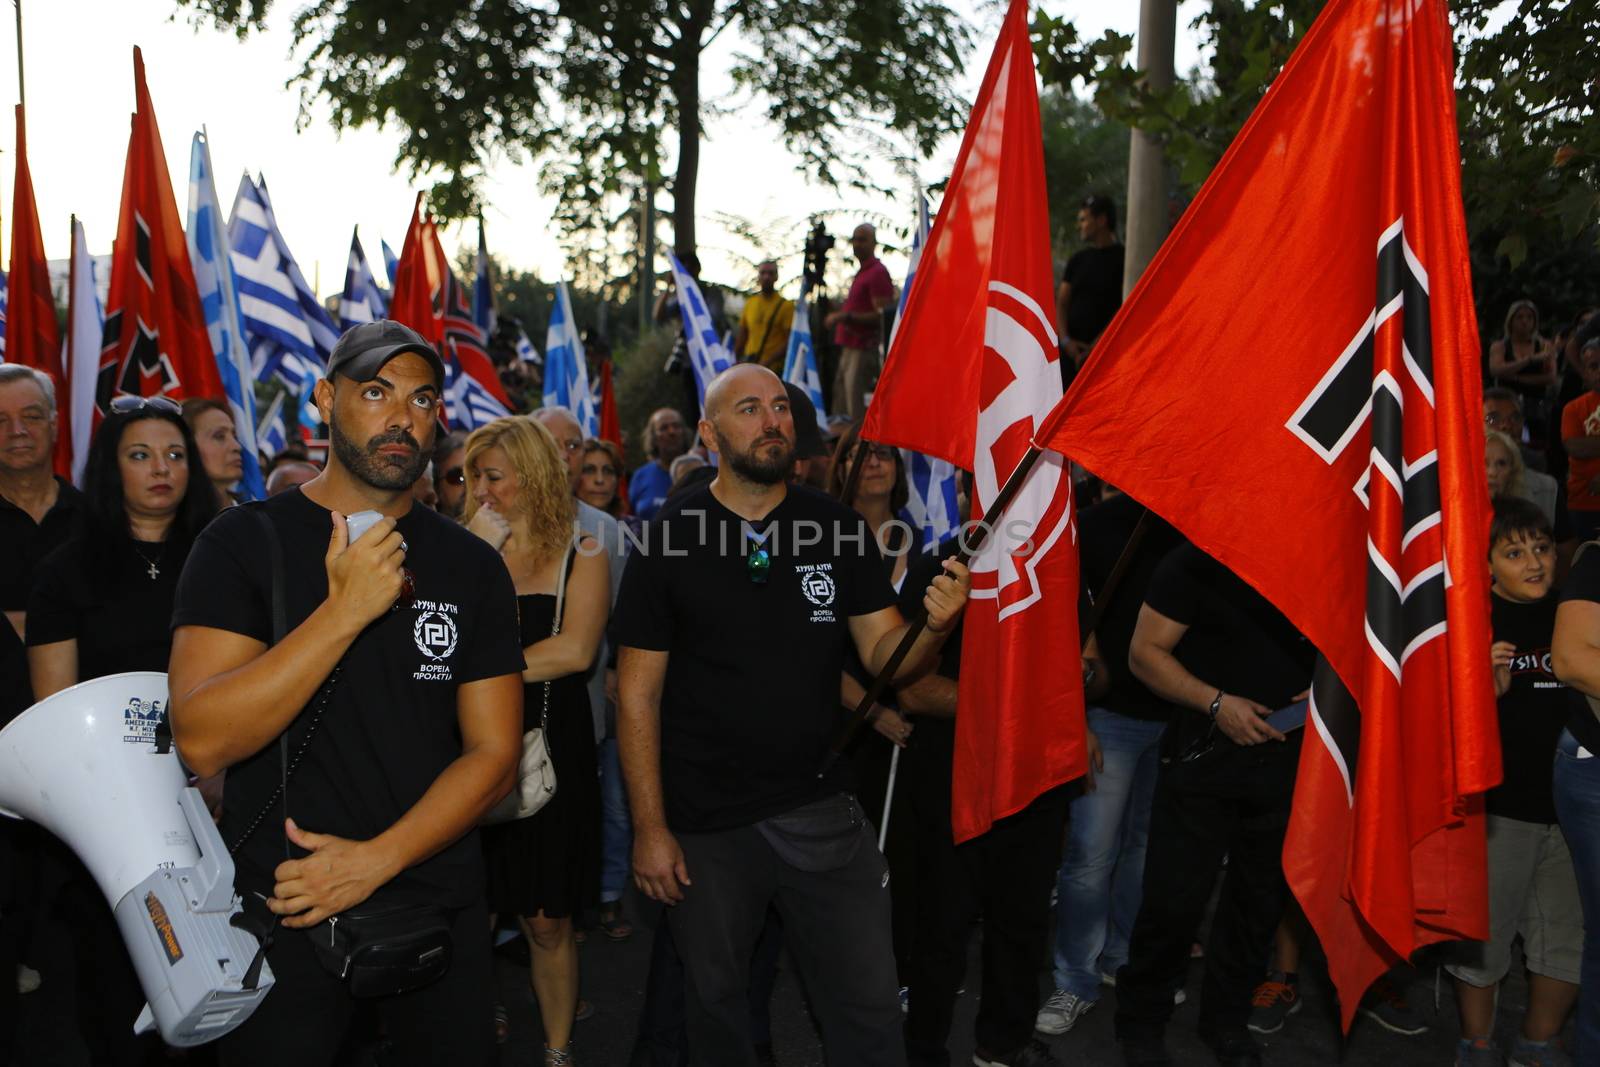 GREECE, Athens: A man shouts slogans to the crowd as Greece's far-right Golden Dawn party holds an election rally in Athens on September 16, 2015, four days ahead of the country's snap national election. 